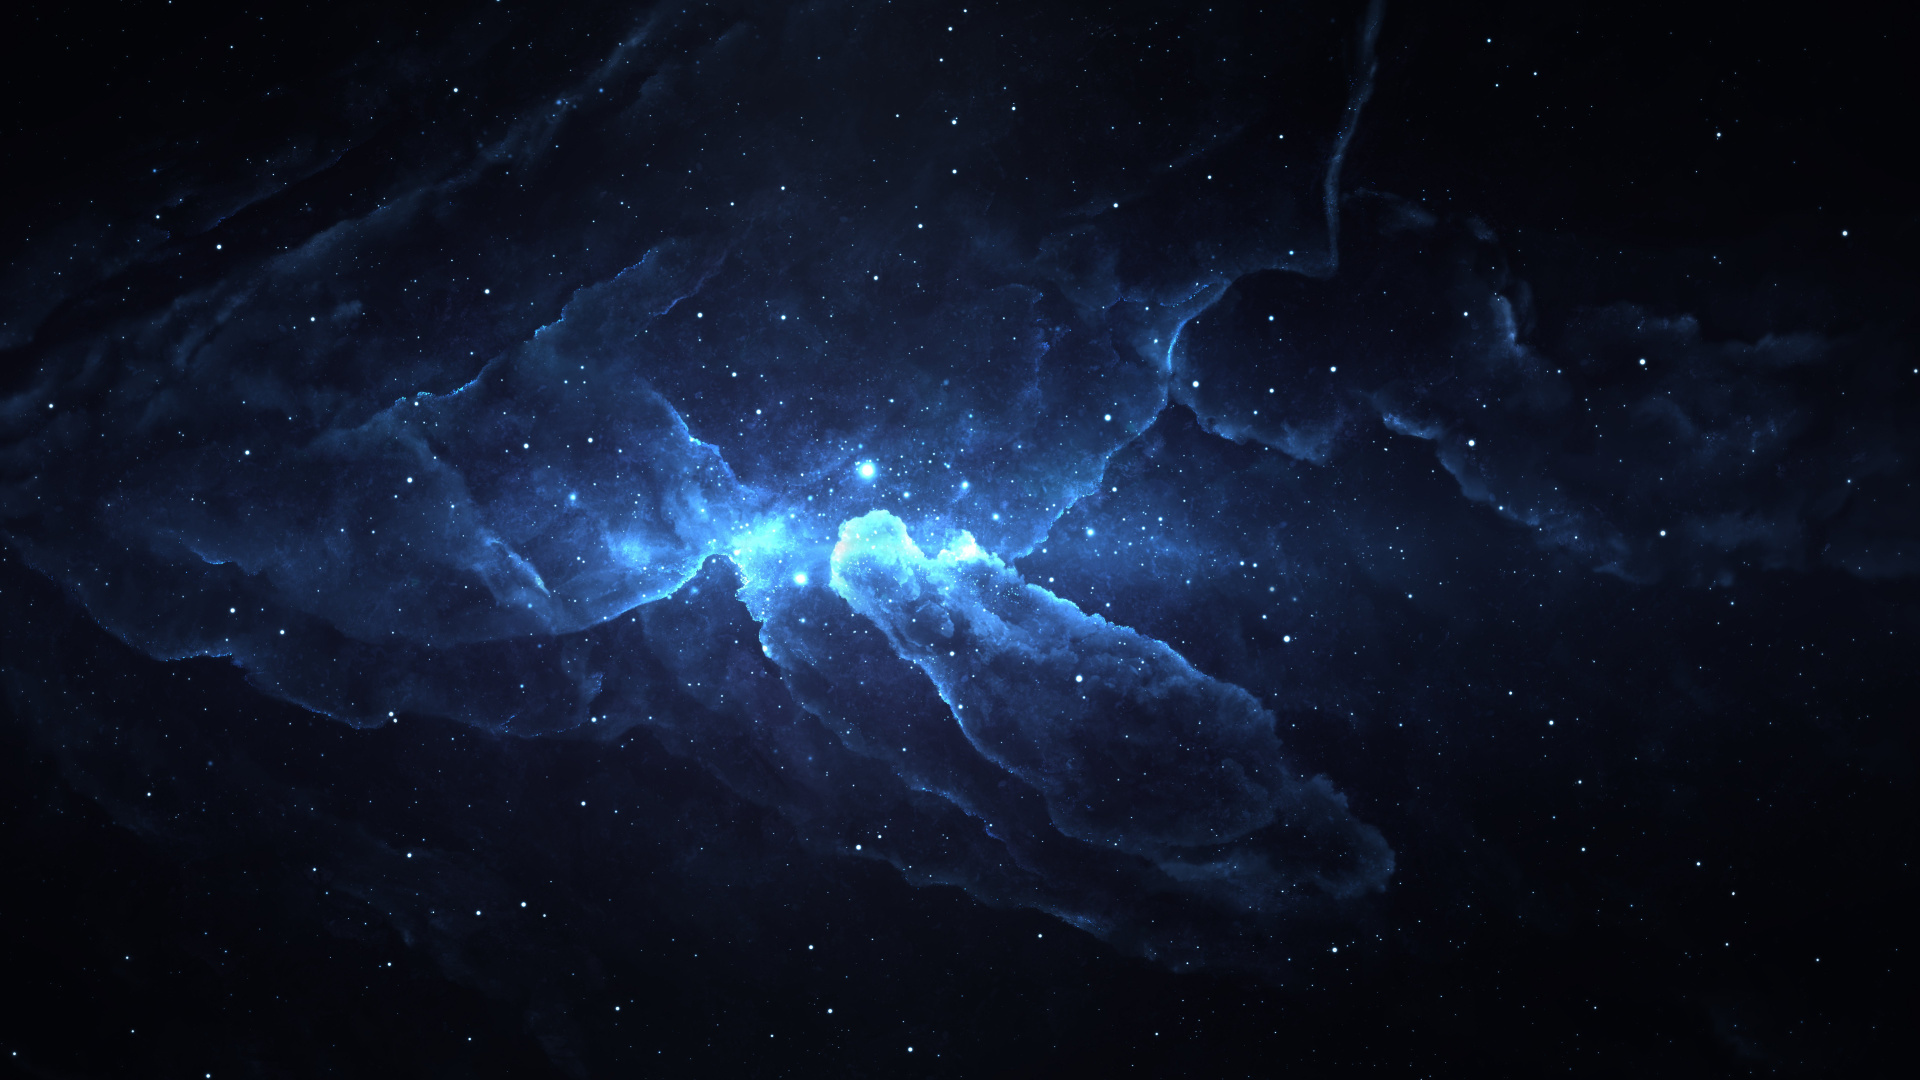 White and Blue Galaxy Illustration. Wallpaper in 1920x1080 Resolution